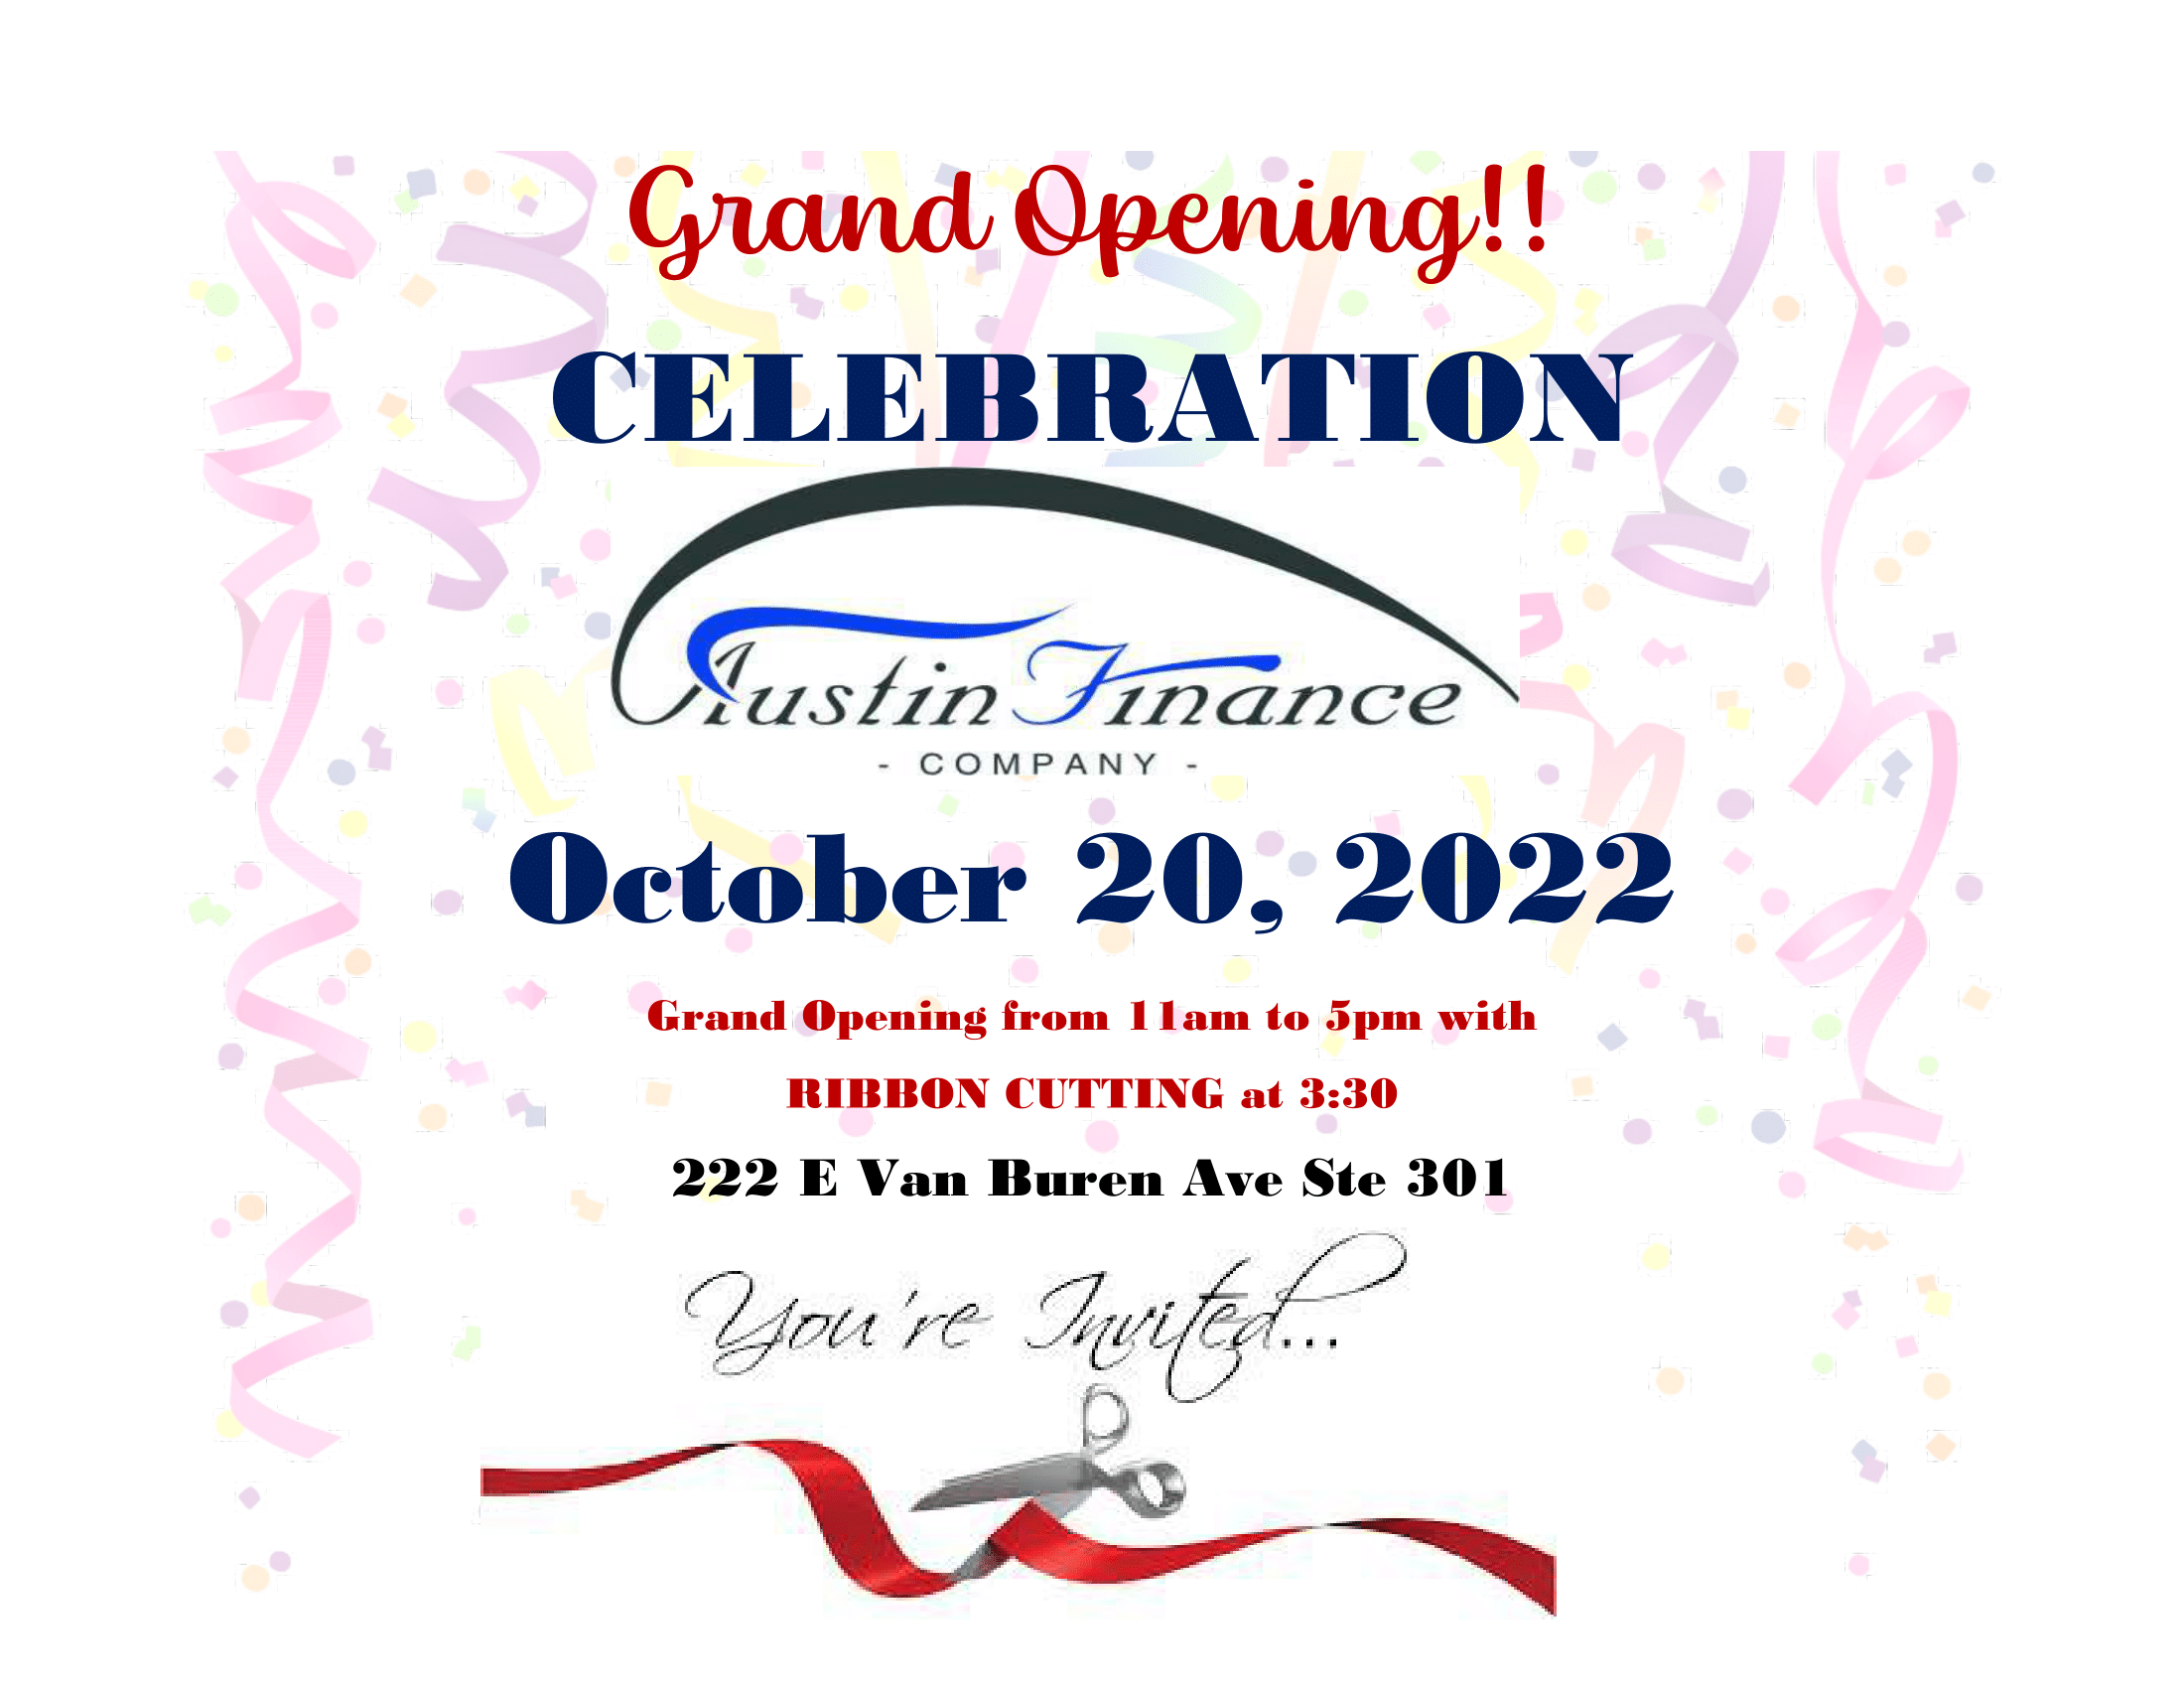 Grand Opening!! Celebration!  Austin Finance Company. October 20, 2022. Grand Opening from 11am to 5pm with RIBBON CUTTTING at 3:30. 222 E Van Buren Ave Ste 301. You're Invited...